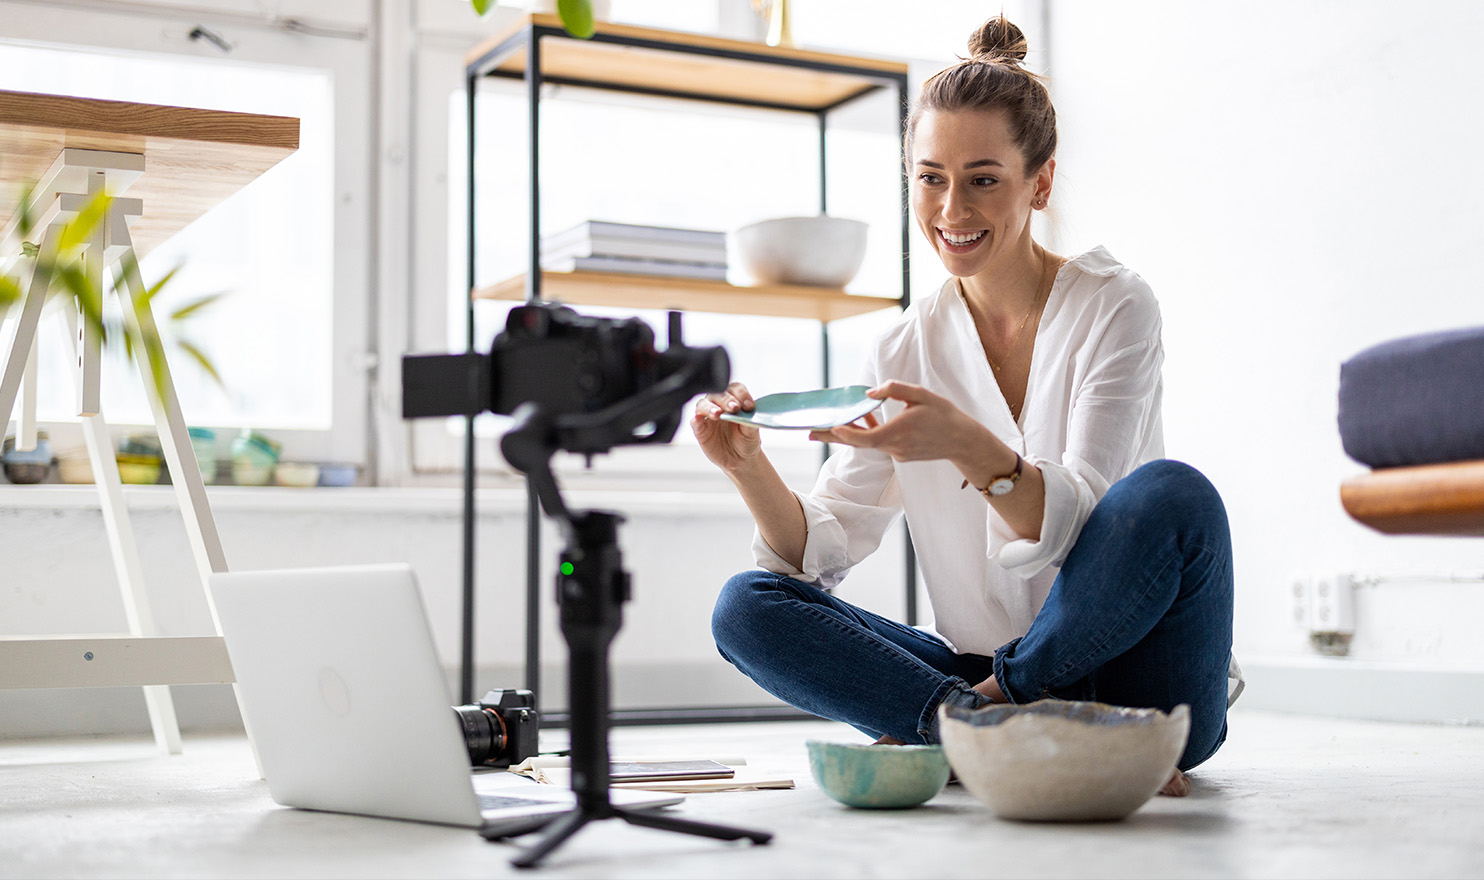 A crafter is siting on the floor of her studio in front of a phone on a tripod as she goes live on social media to show off her latest creations.